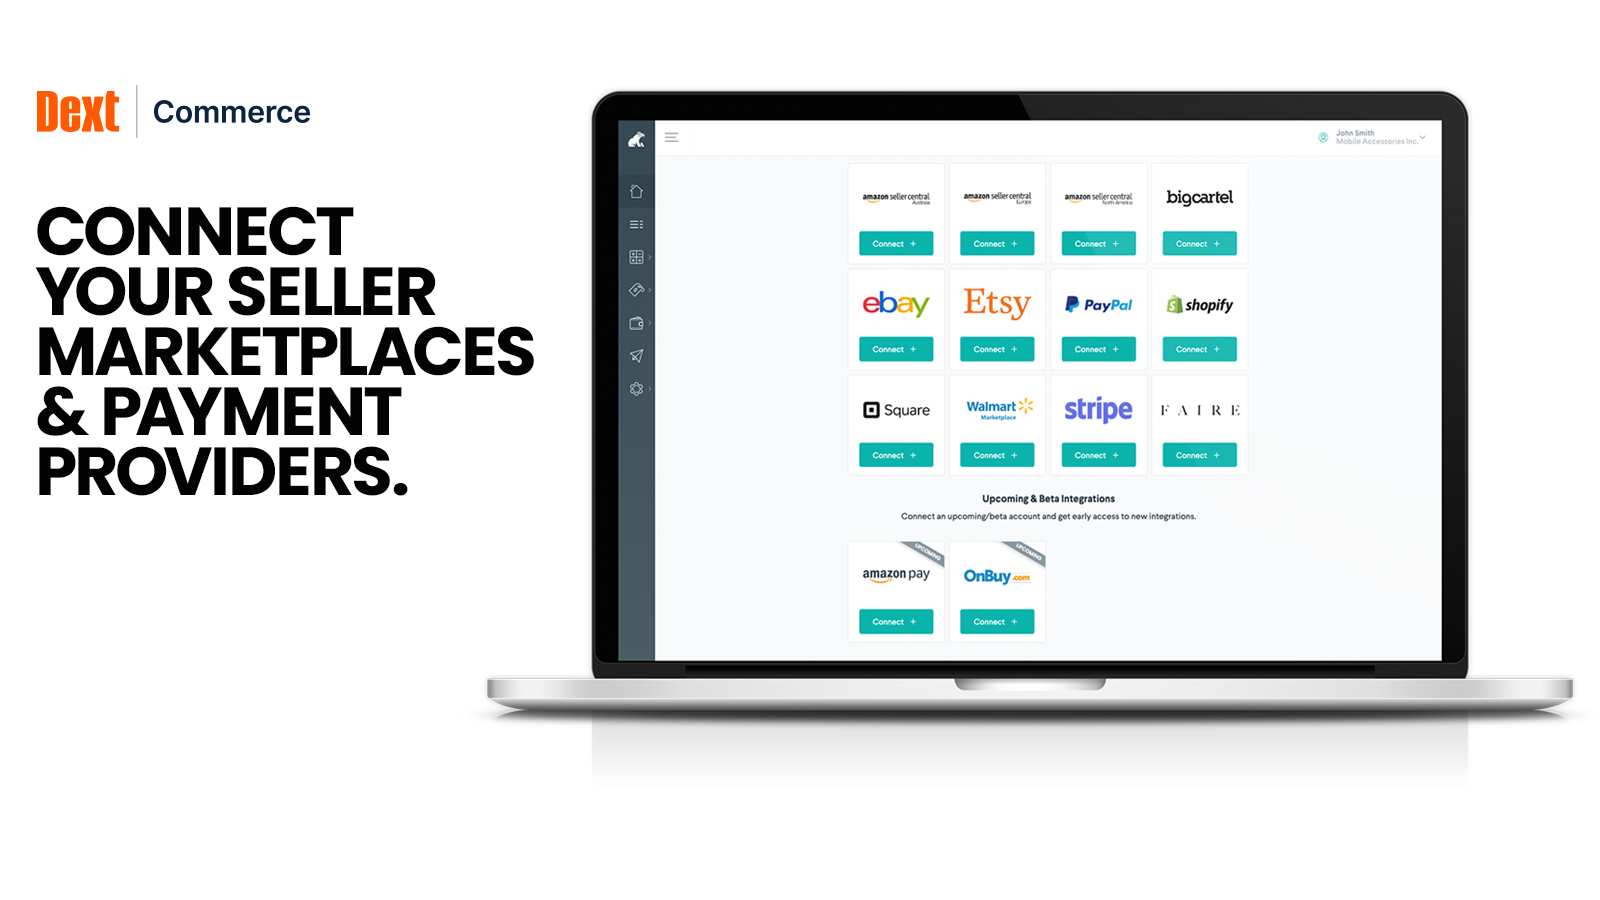 Connect your seller marketplaces & payment providers.